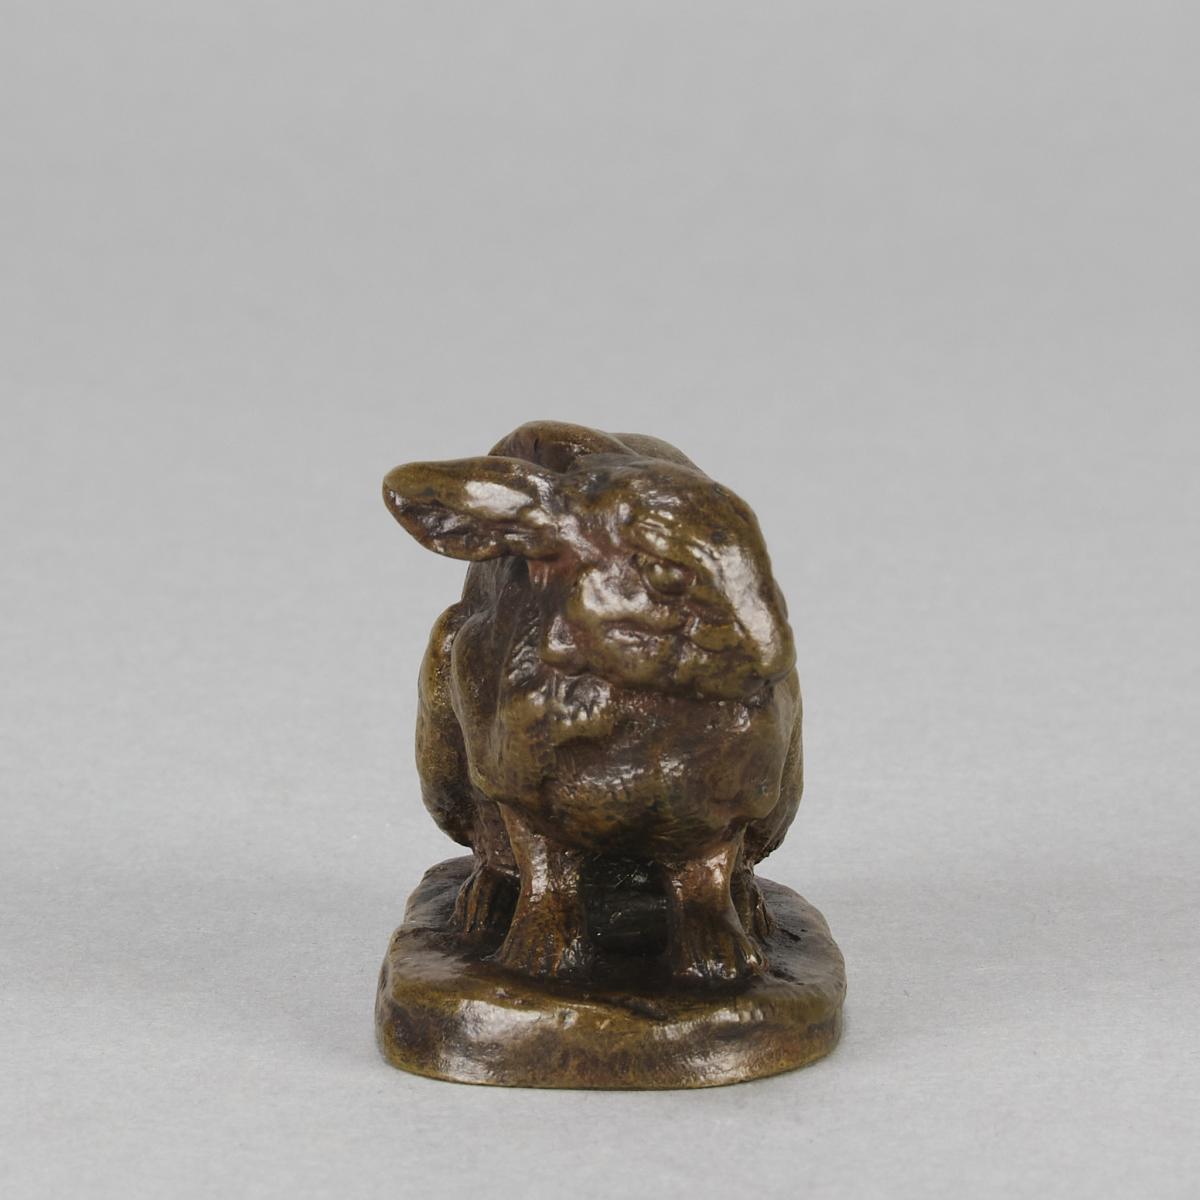 Mid 19th Century French Animalier Bronze Study Entitled "Lapin Assis" By Antoine L Barye